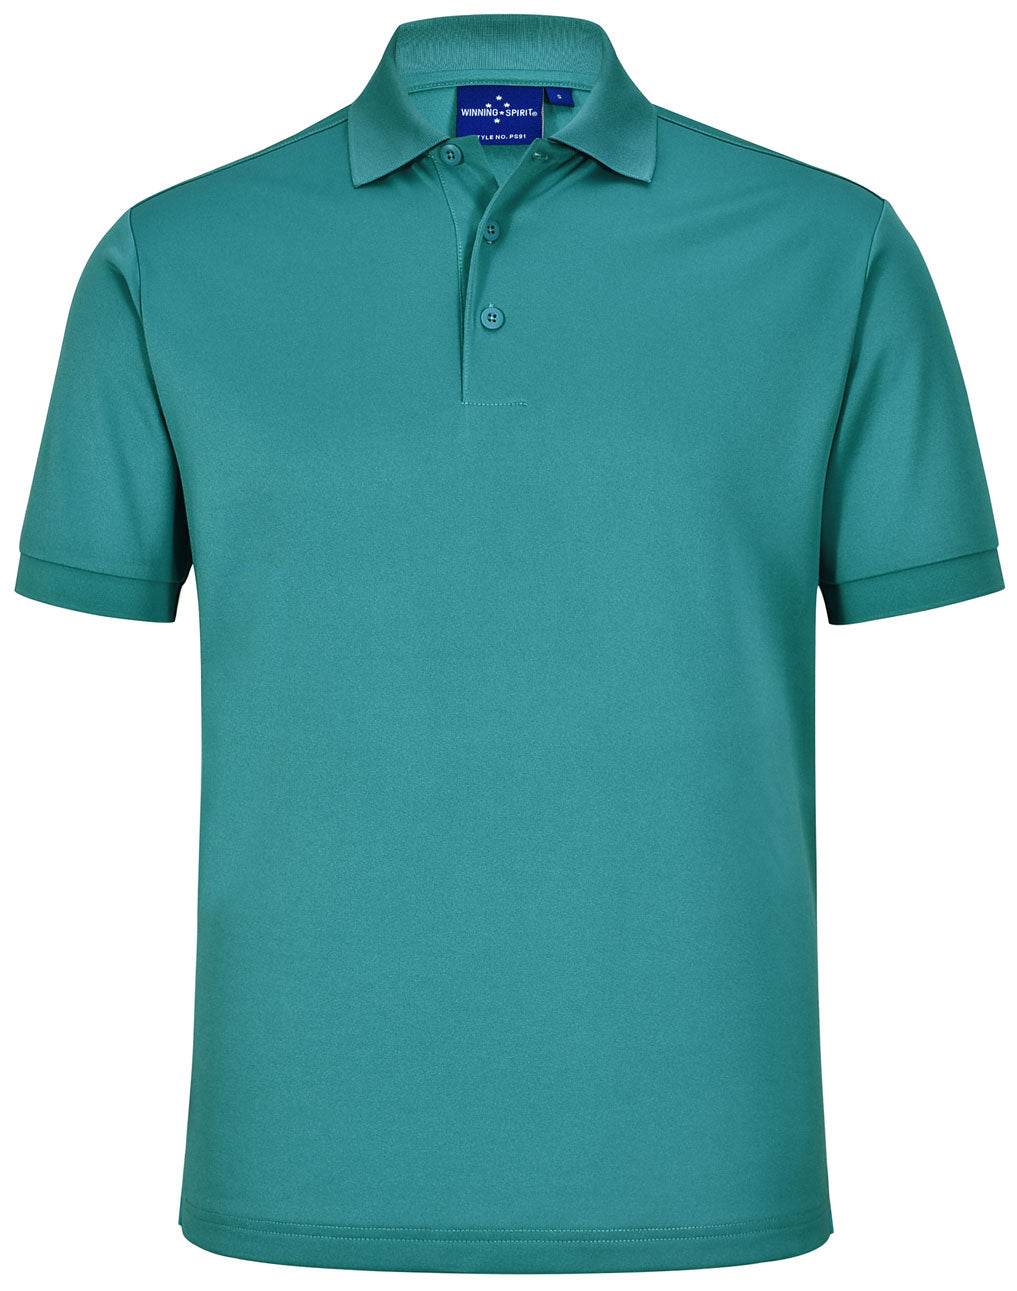 Winning Spirit Men's Sustainable Poly/Cotton Corporate Polo Shirt PS91 - Flash Uniforms 